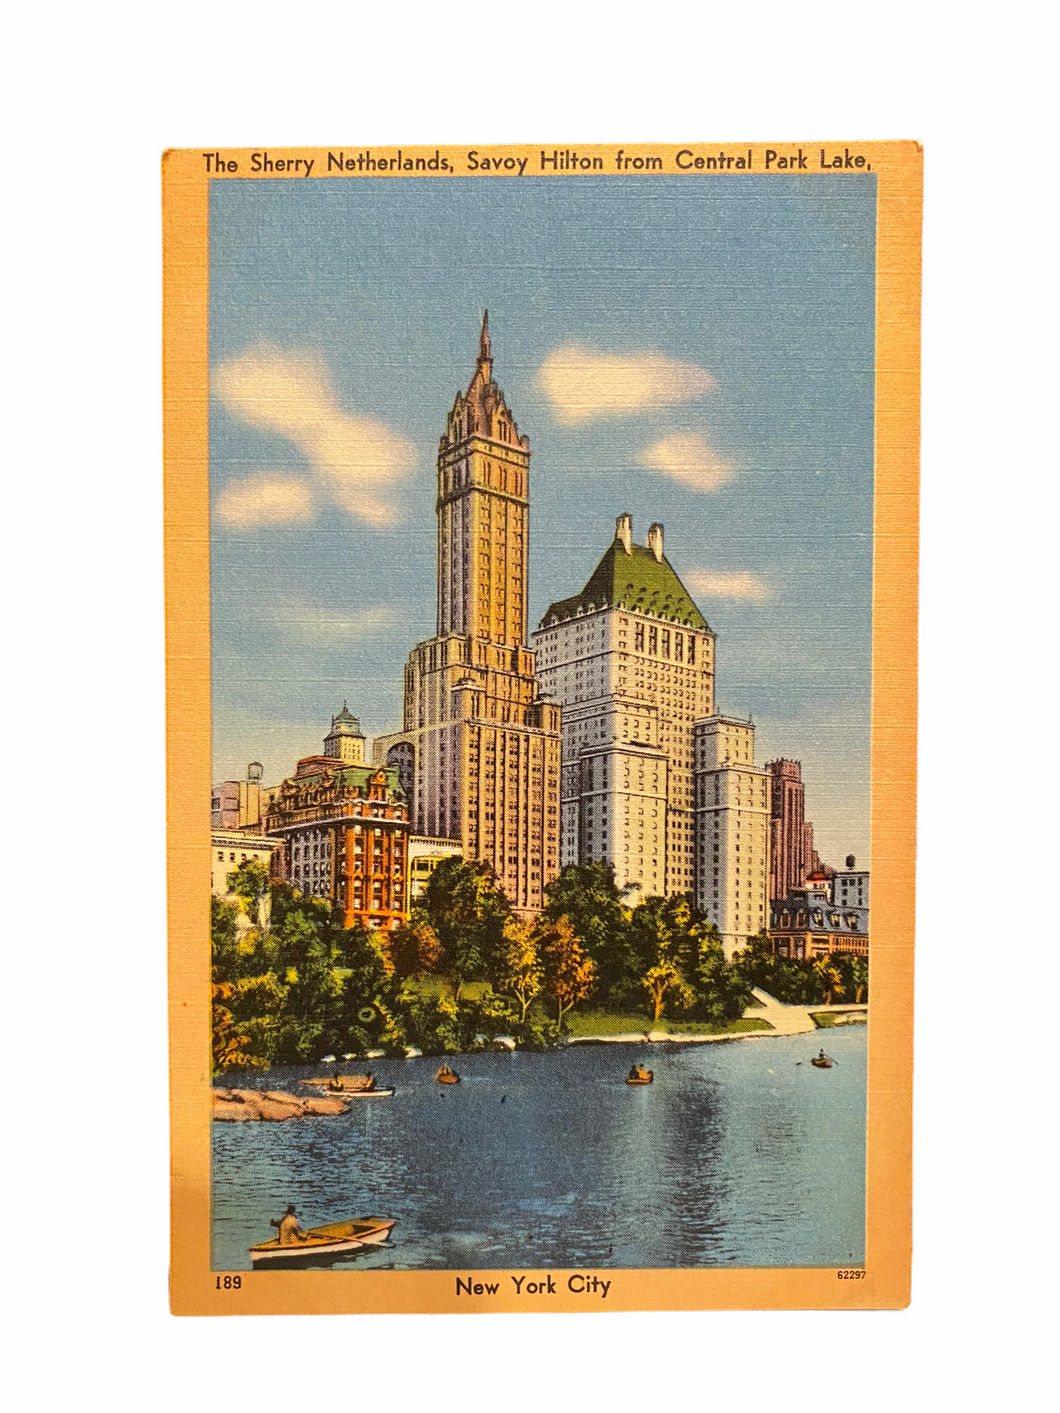 The Sherry Netherlands, Savory Hilton From Central Park Lake, New York City. Unused Linen Postcard Circa 1930-1944